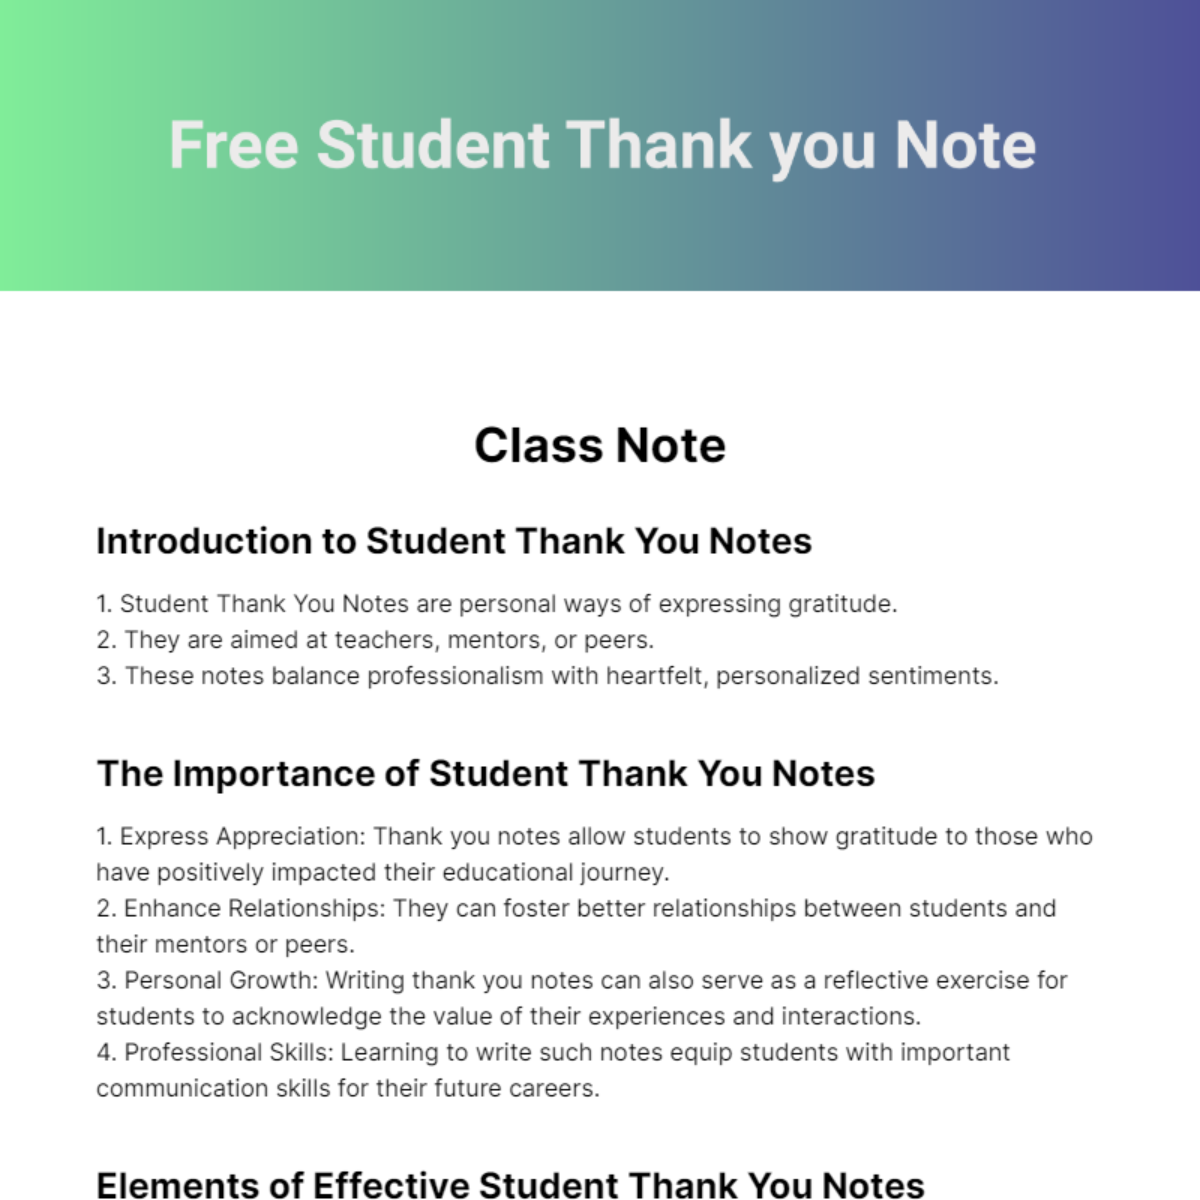 Free Student Thank you Note Template